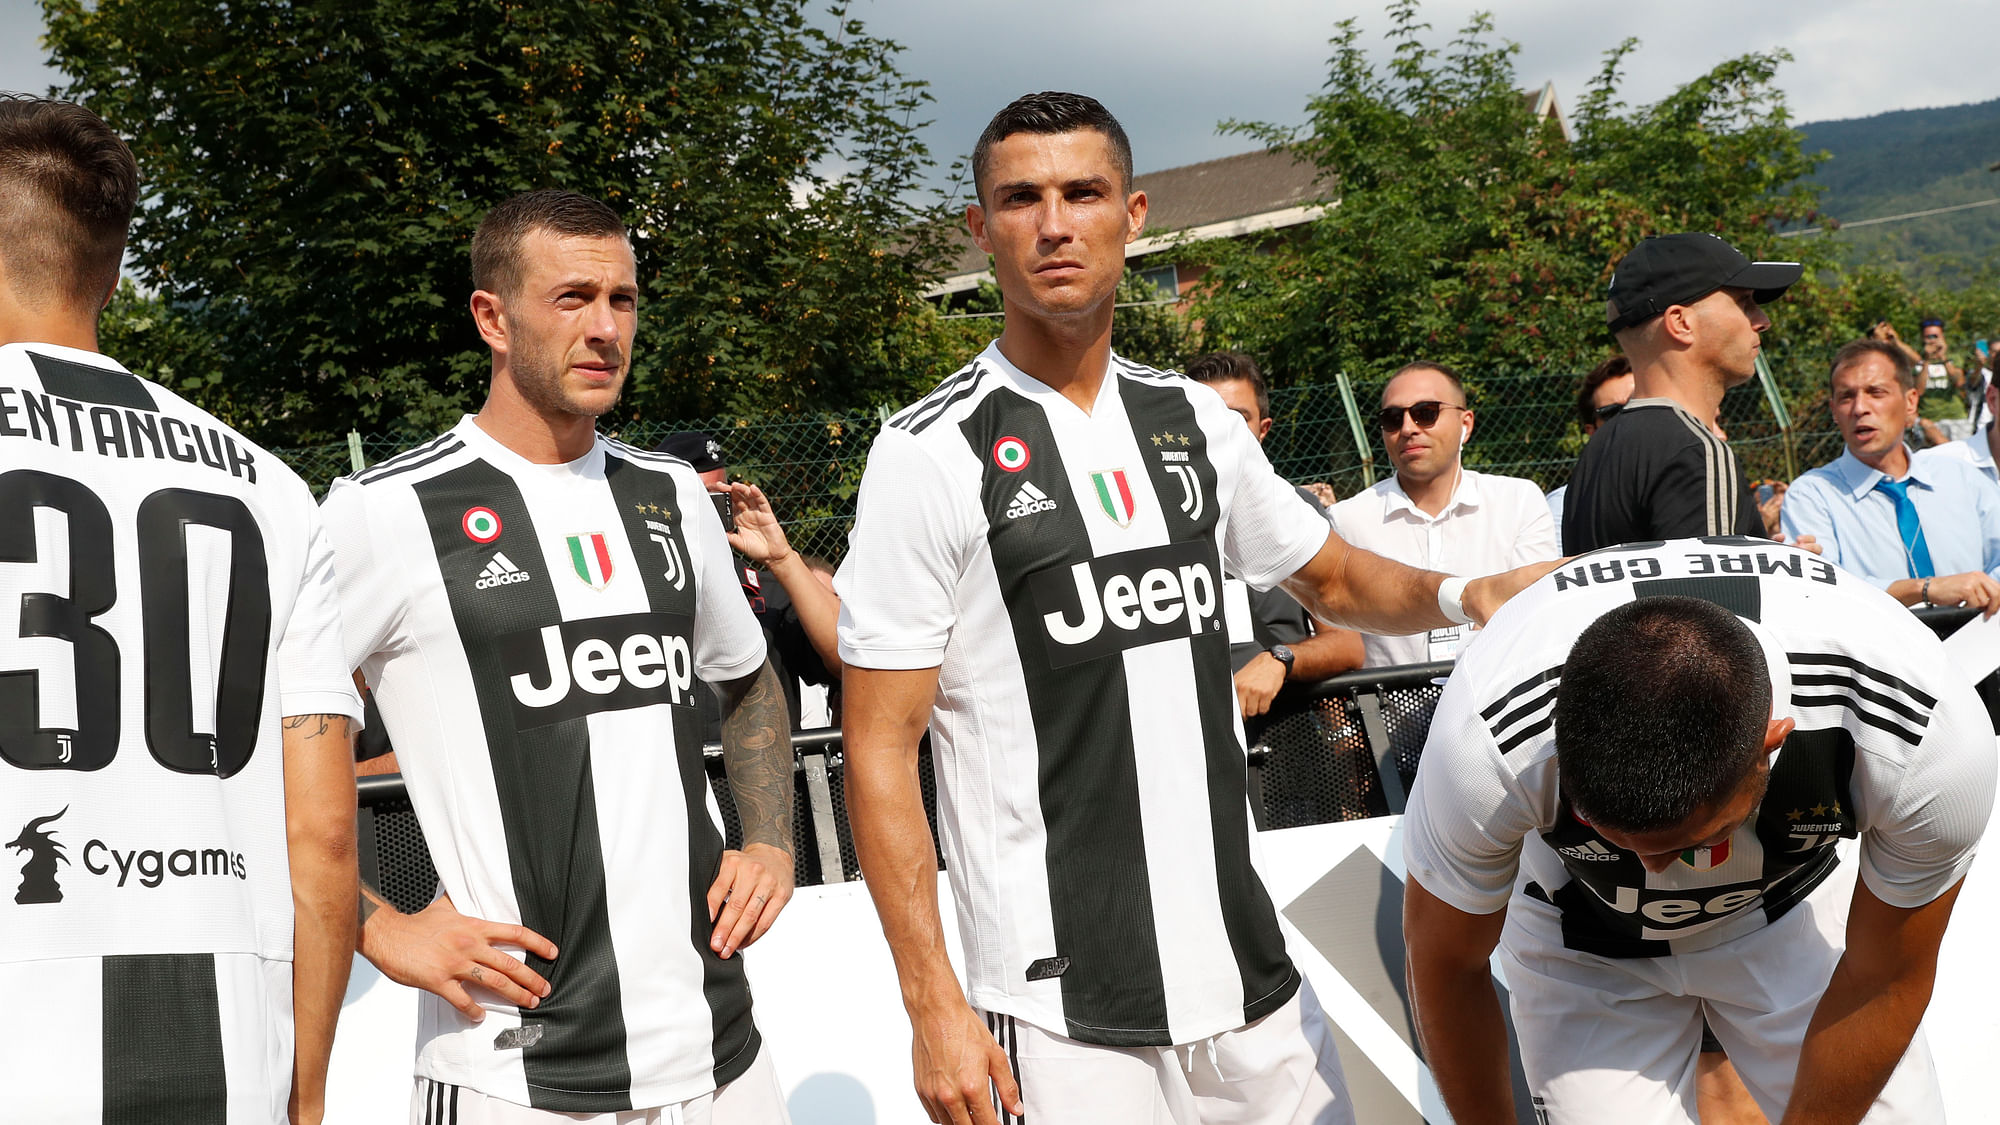 From left, Juventus’ Federico Bernardeshi, Rodrigo Bentancur, Cristiano Ronaldo and Emre Can arrive to take part in a friendly match between the Juventus A and B teams, in Villar Perosa, northern Italy, Sunday, Aug.12, 2018.